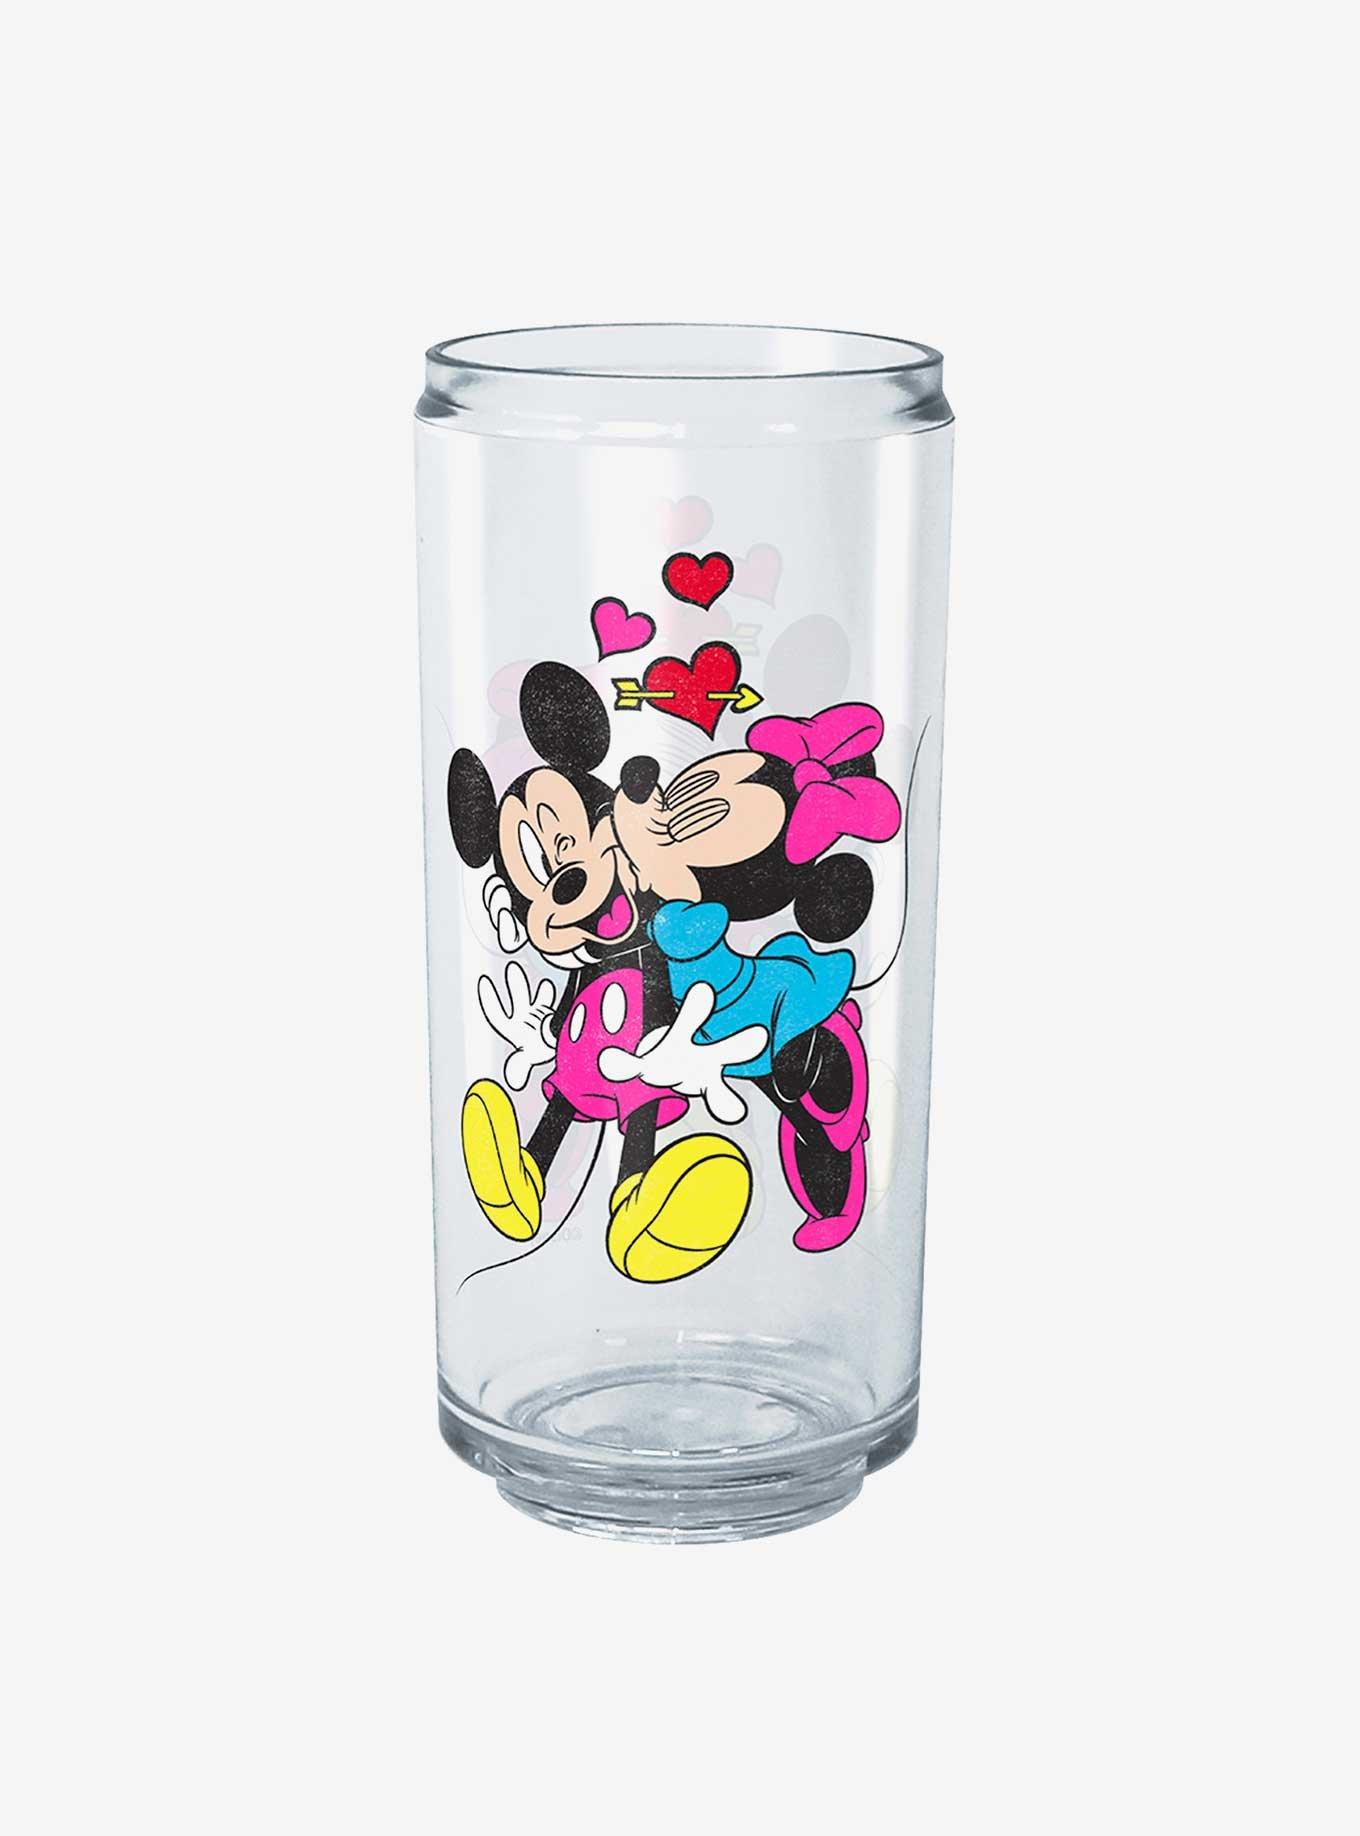 Disney Mickey Mouse Mickey Minnie Love Can Cup